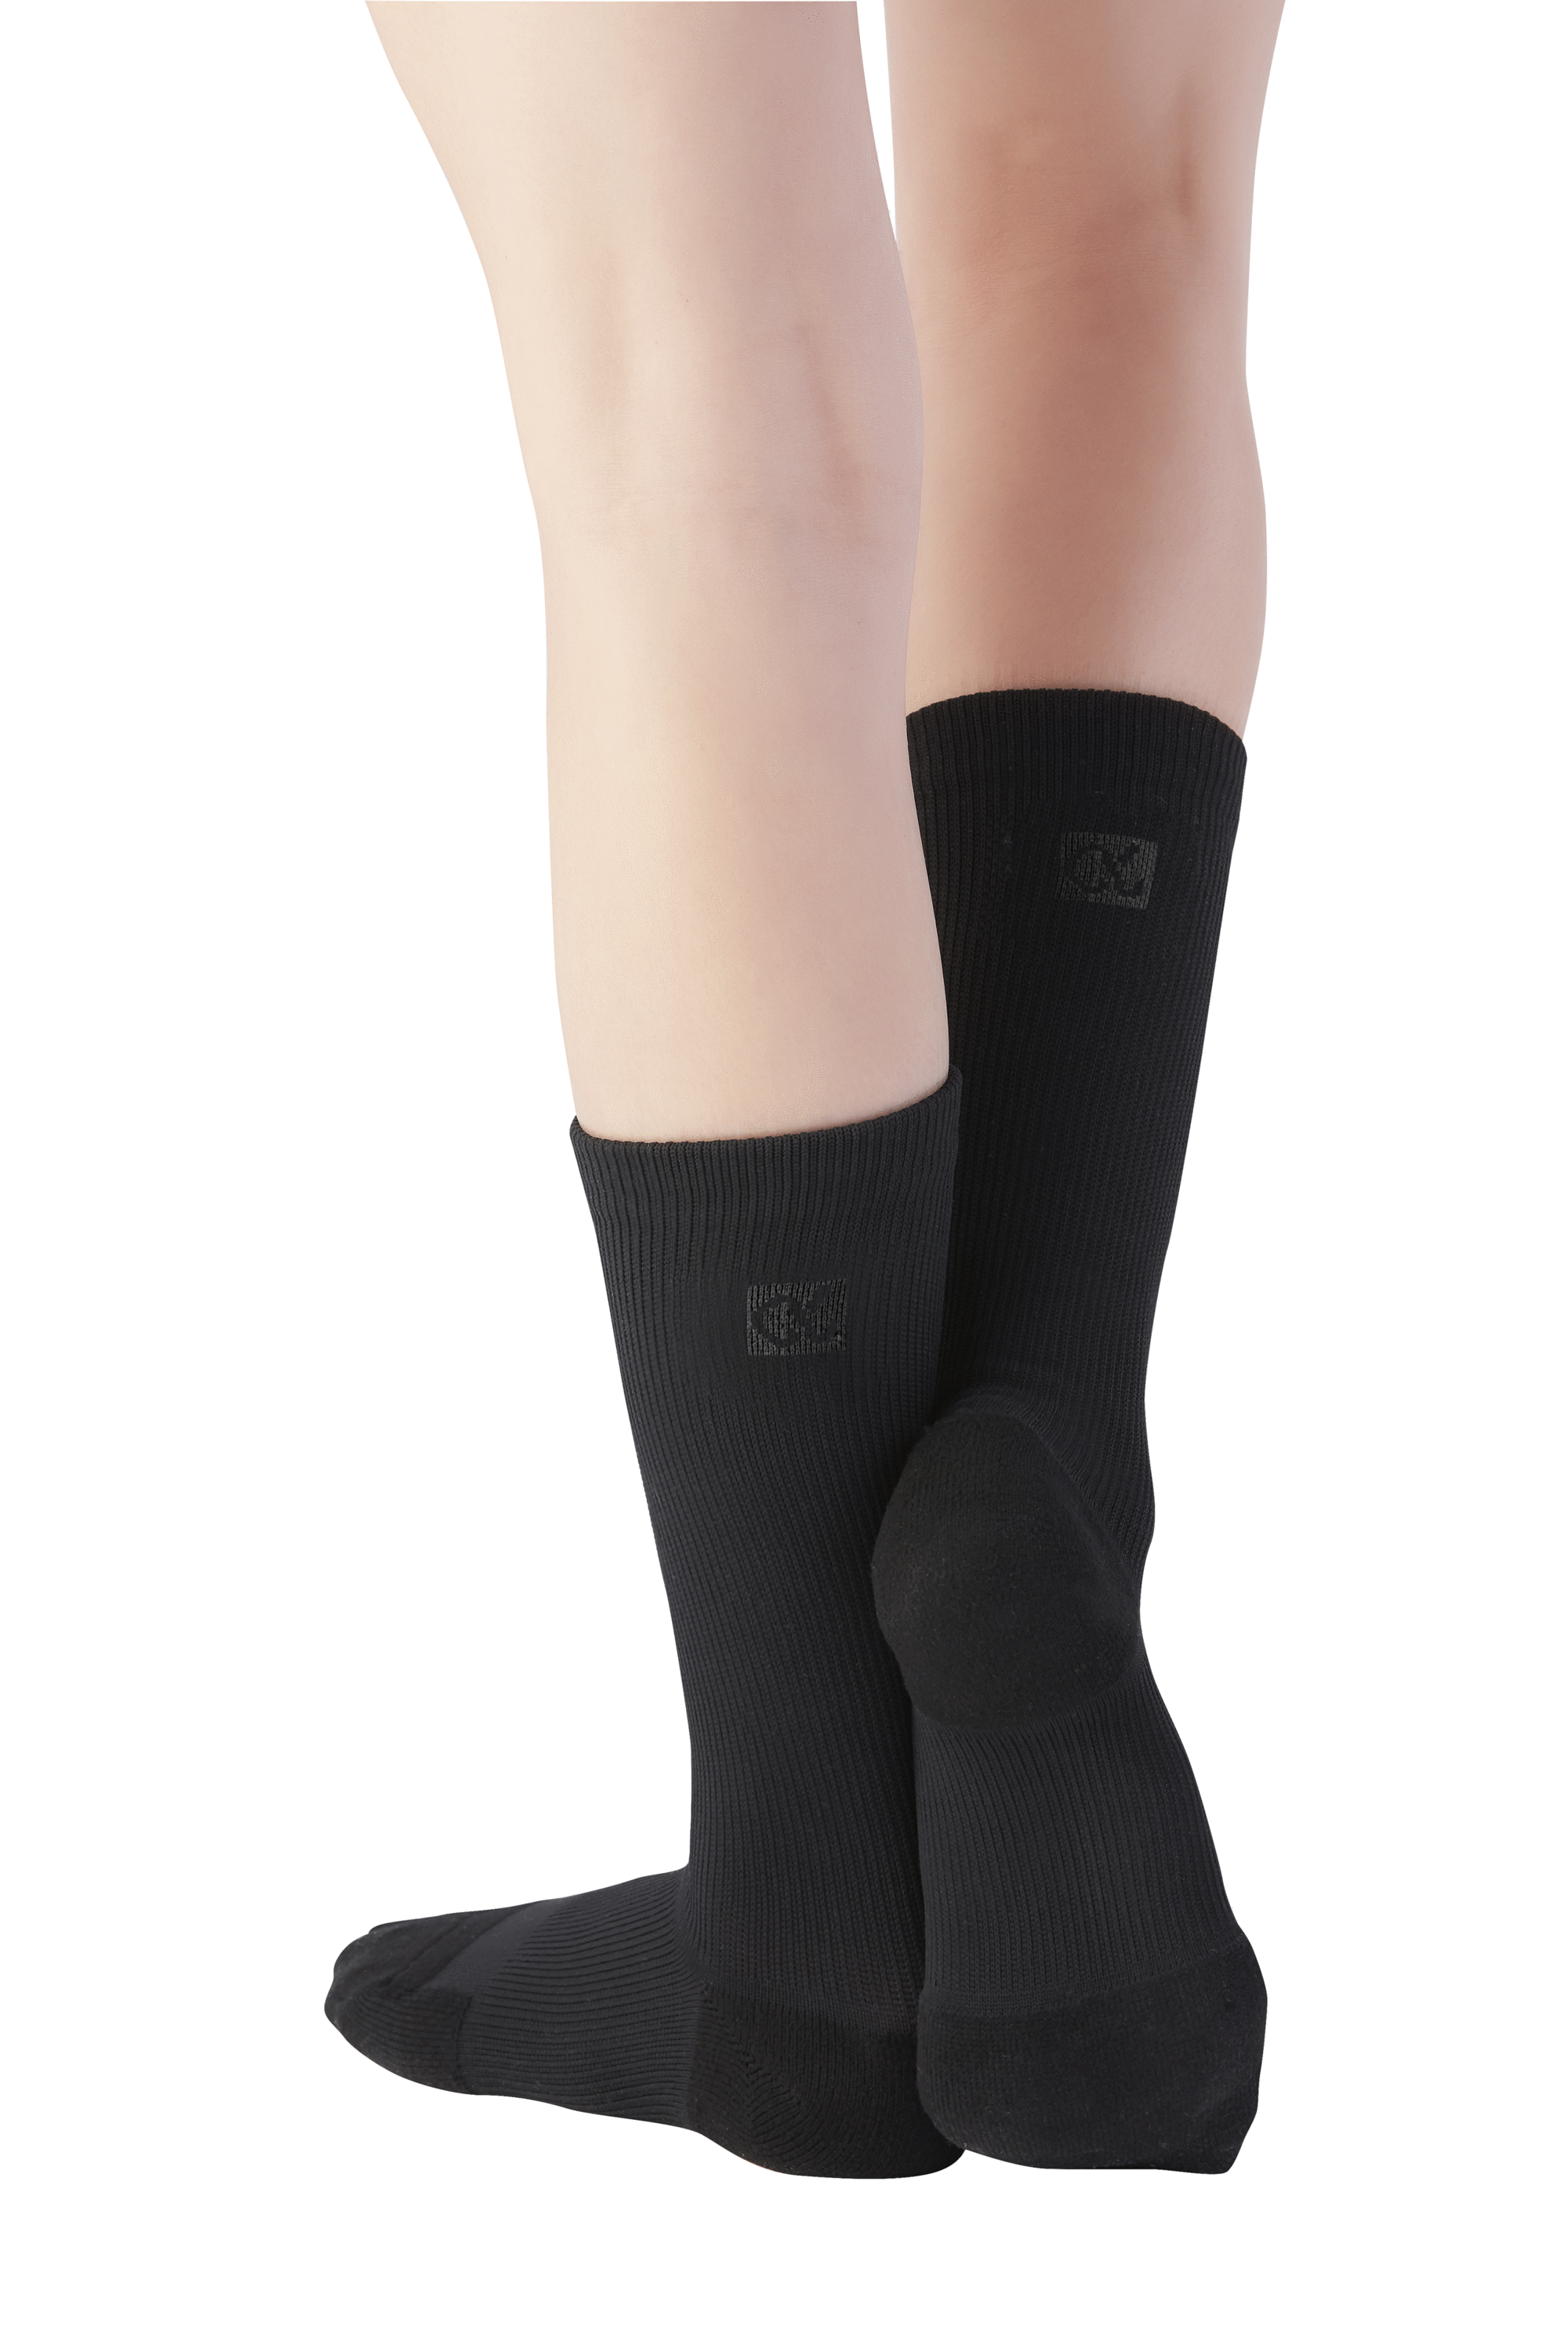 Apolla The Alpha Shock Half Sole Compression With Traction Dance